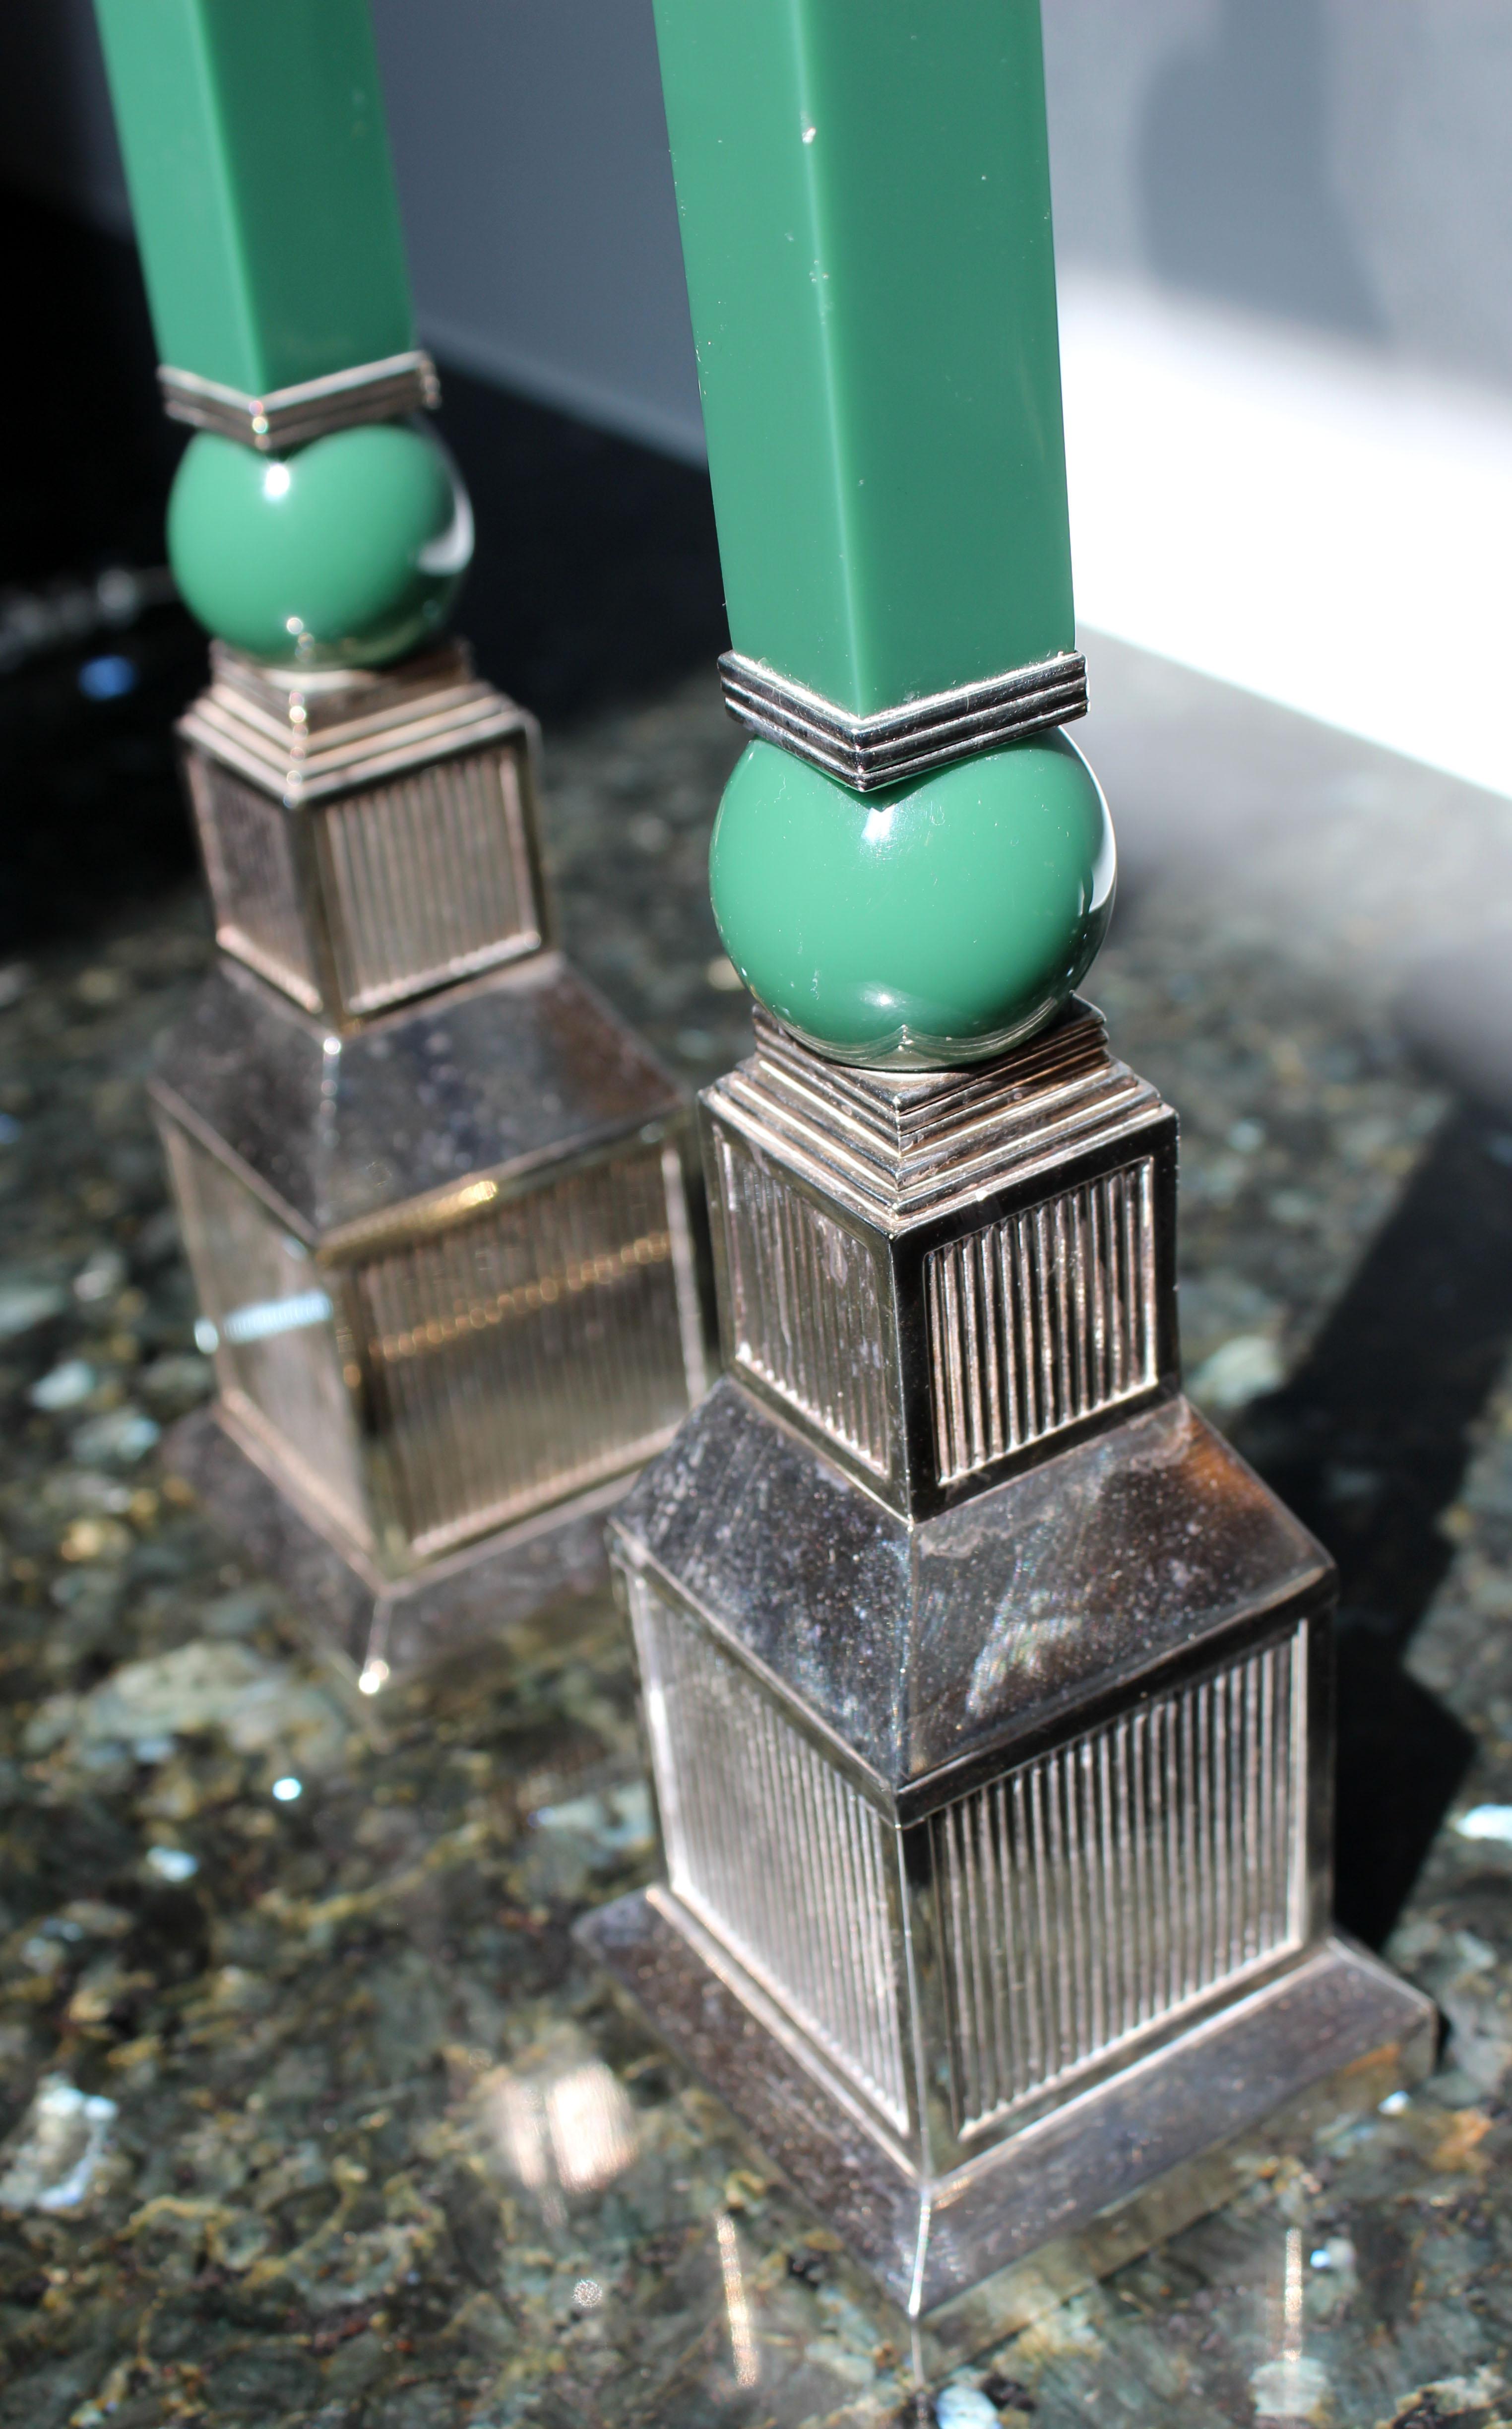 French Mid-Century Modern Gucci Pair of Silver Plated Candlesticks Green Resin, 1970s